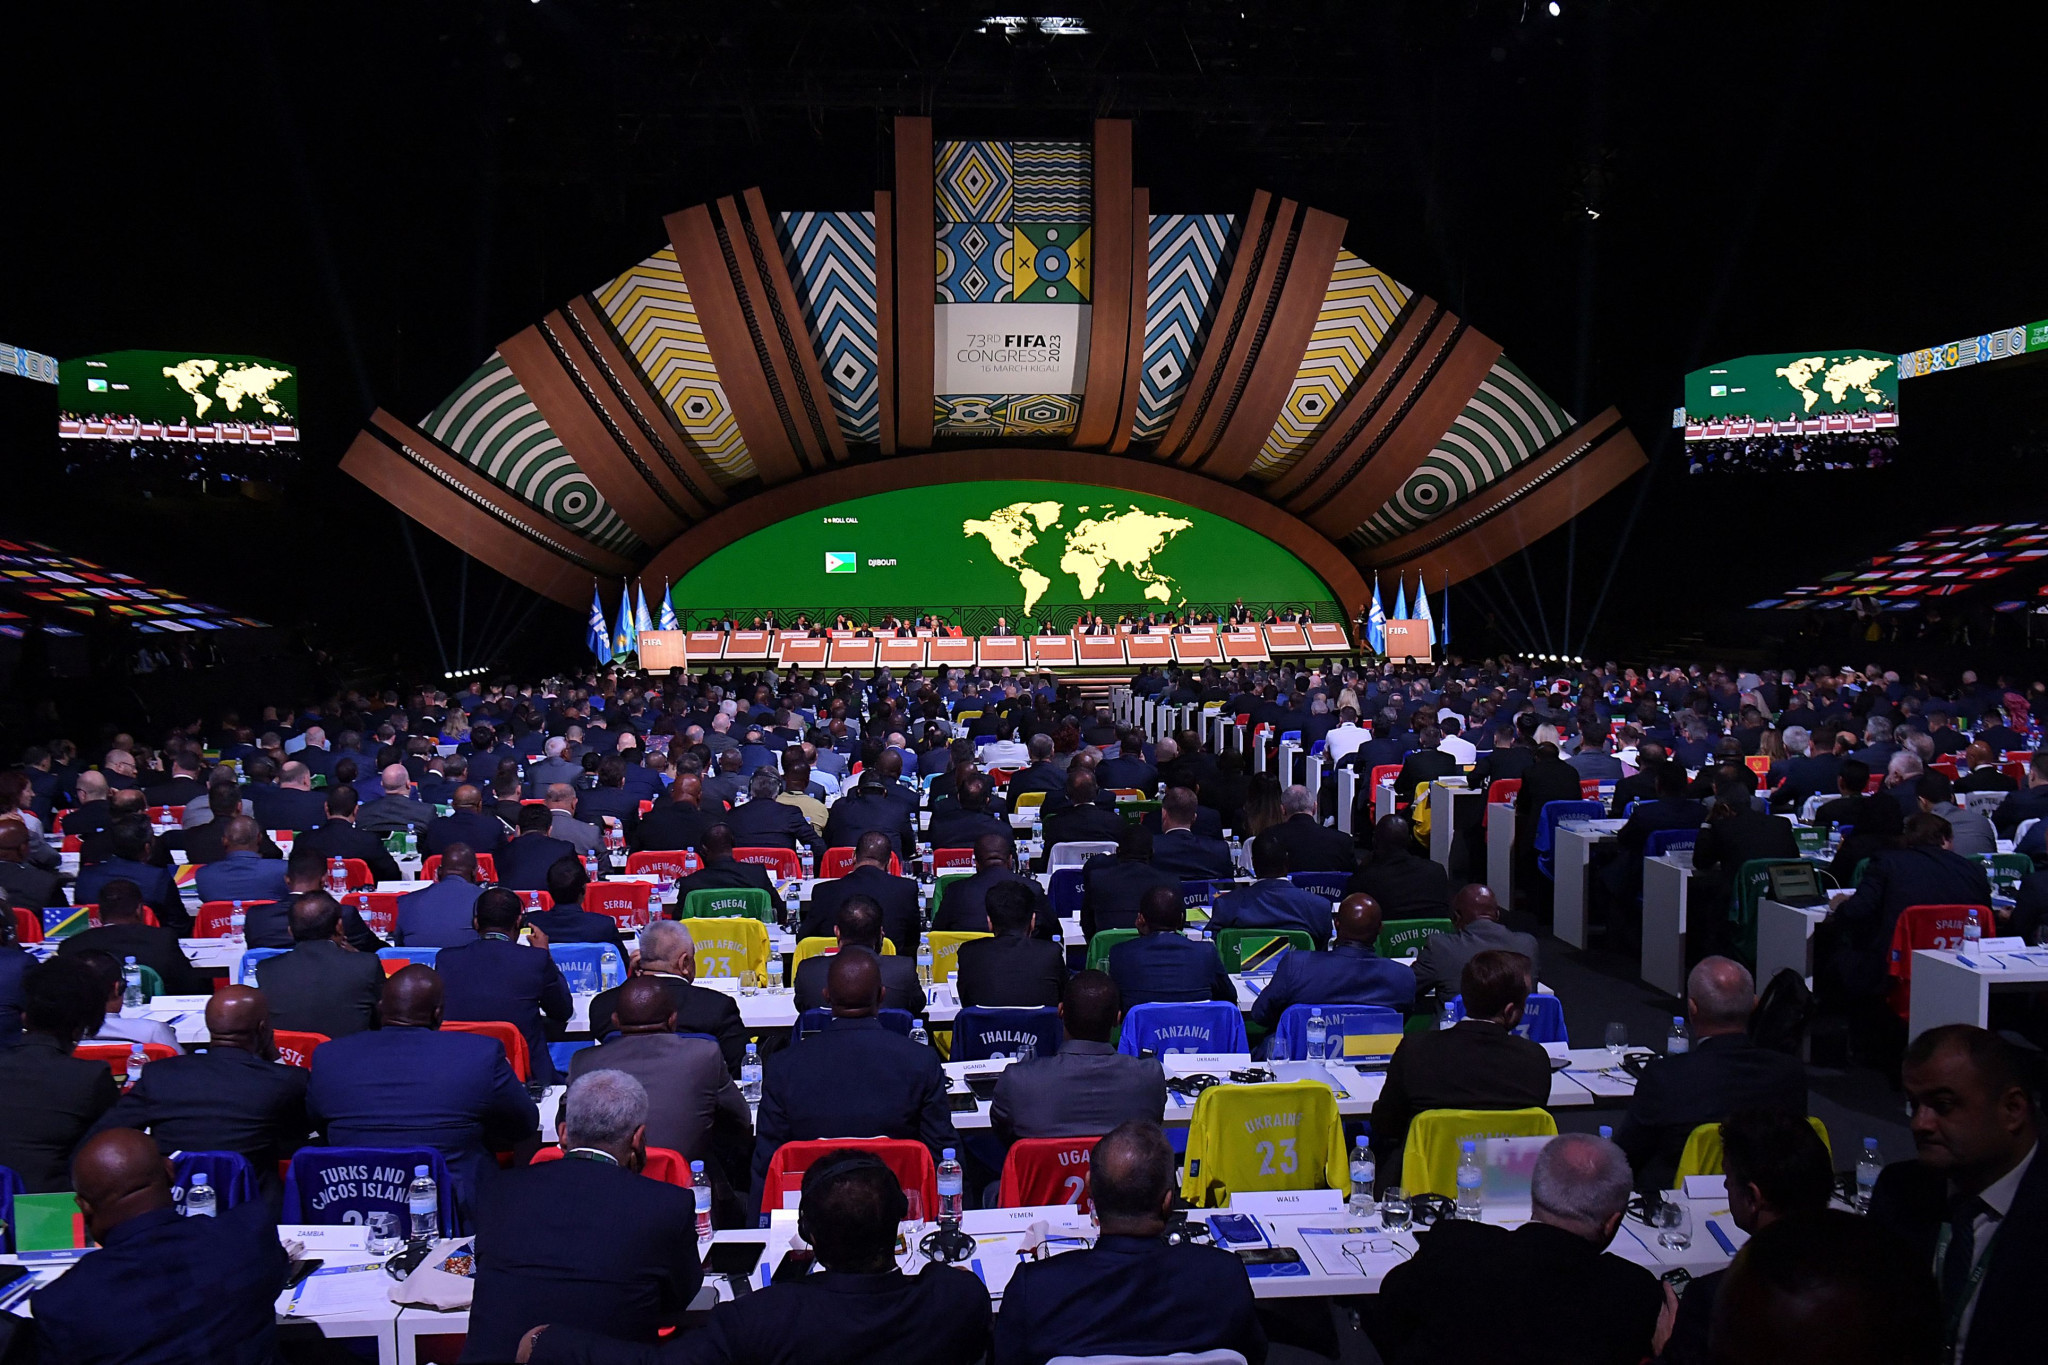 Rwanda become fourth African host of FIFA Congress as Kigali welcomes delegates